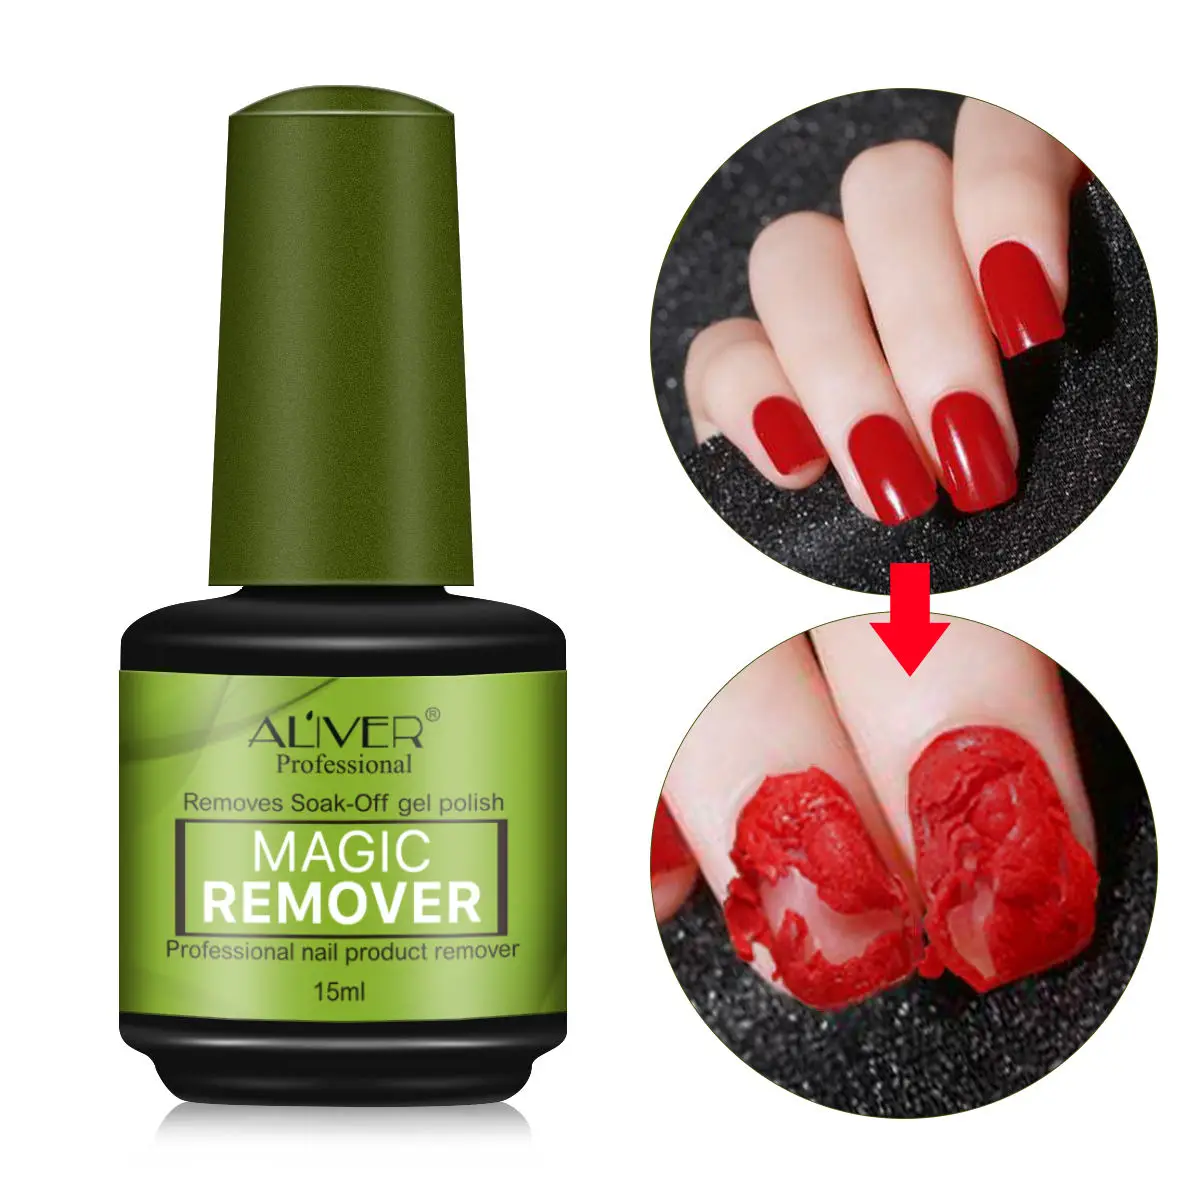 

ALIVER Private Label Magic Nail Polish Remover Professional Easily & Quickly Removes Soak-Off Gel Nail Polish in 3-5 Minutes